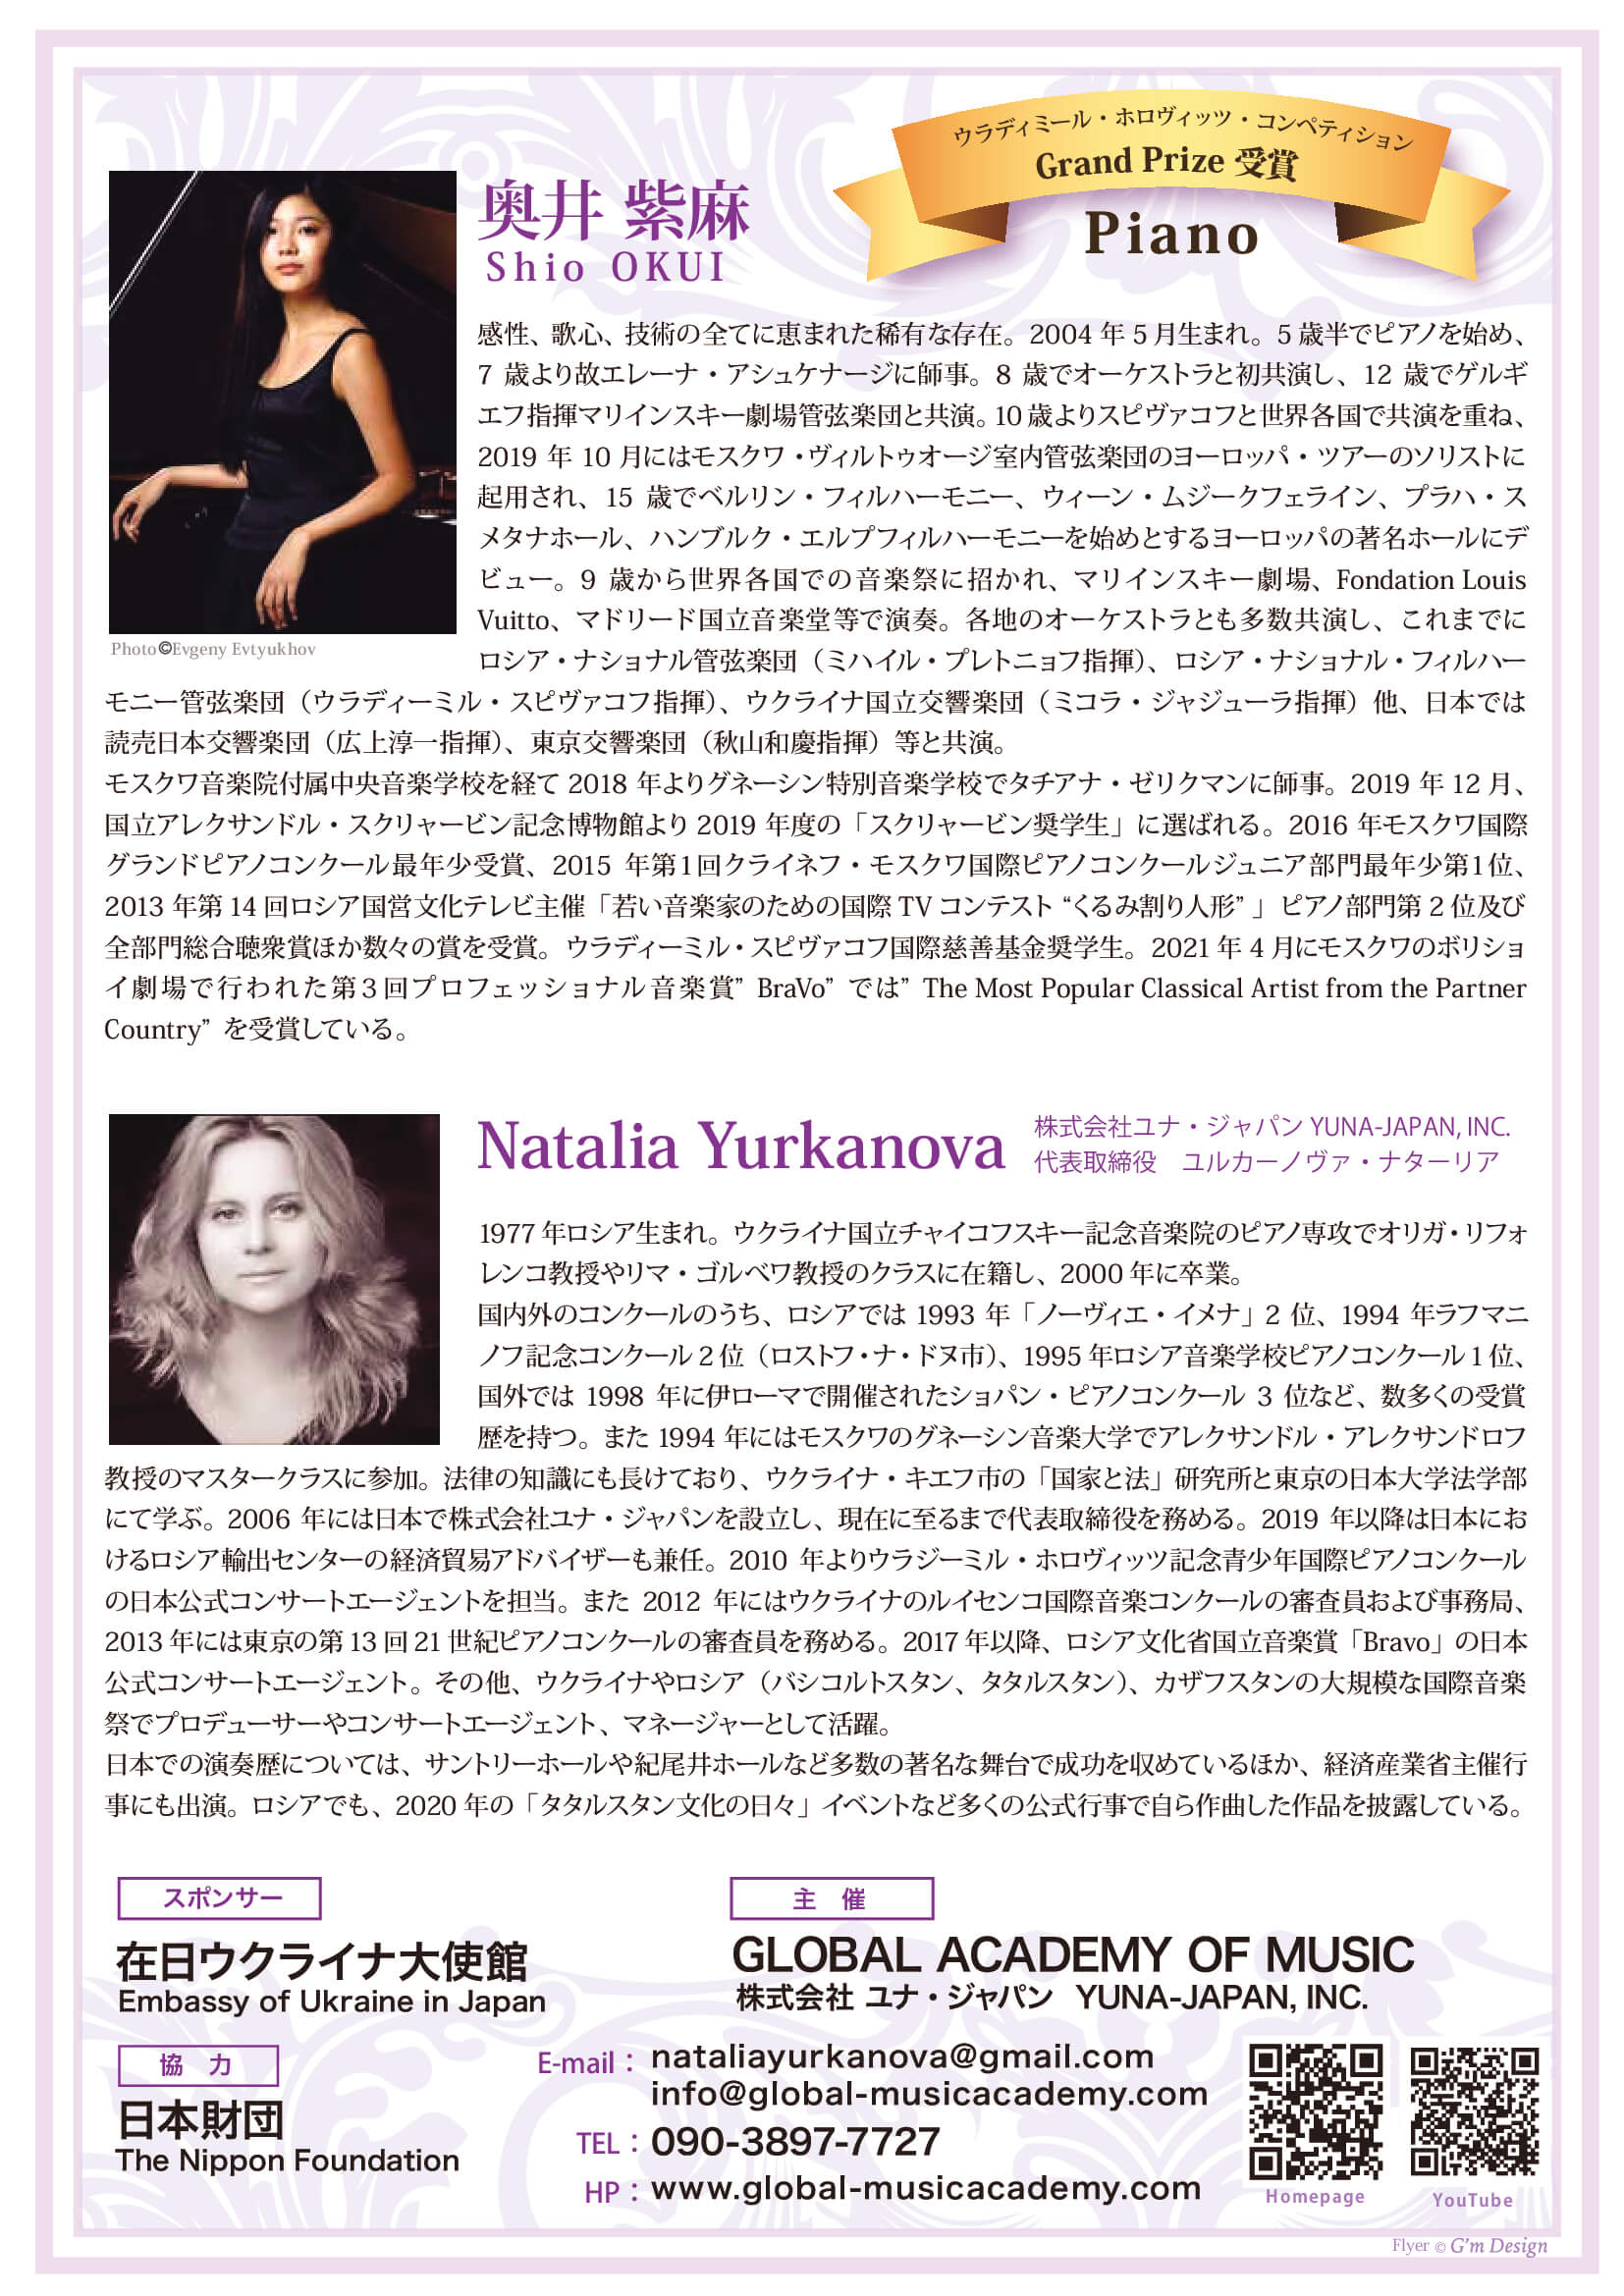 The International Competition for young pianists in memory of Vladimir Horowitz, prize winner concert in Tokyo